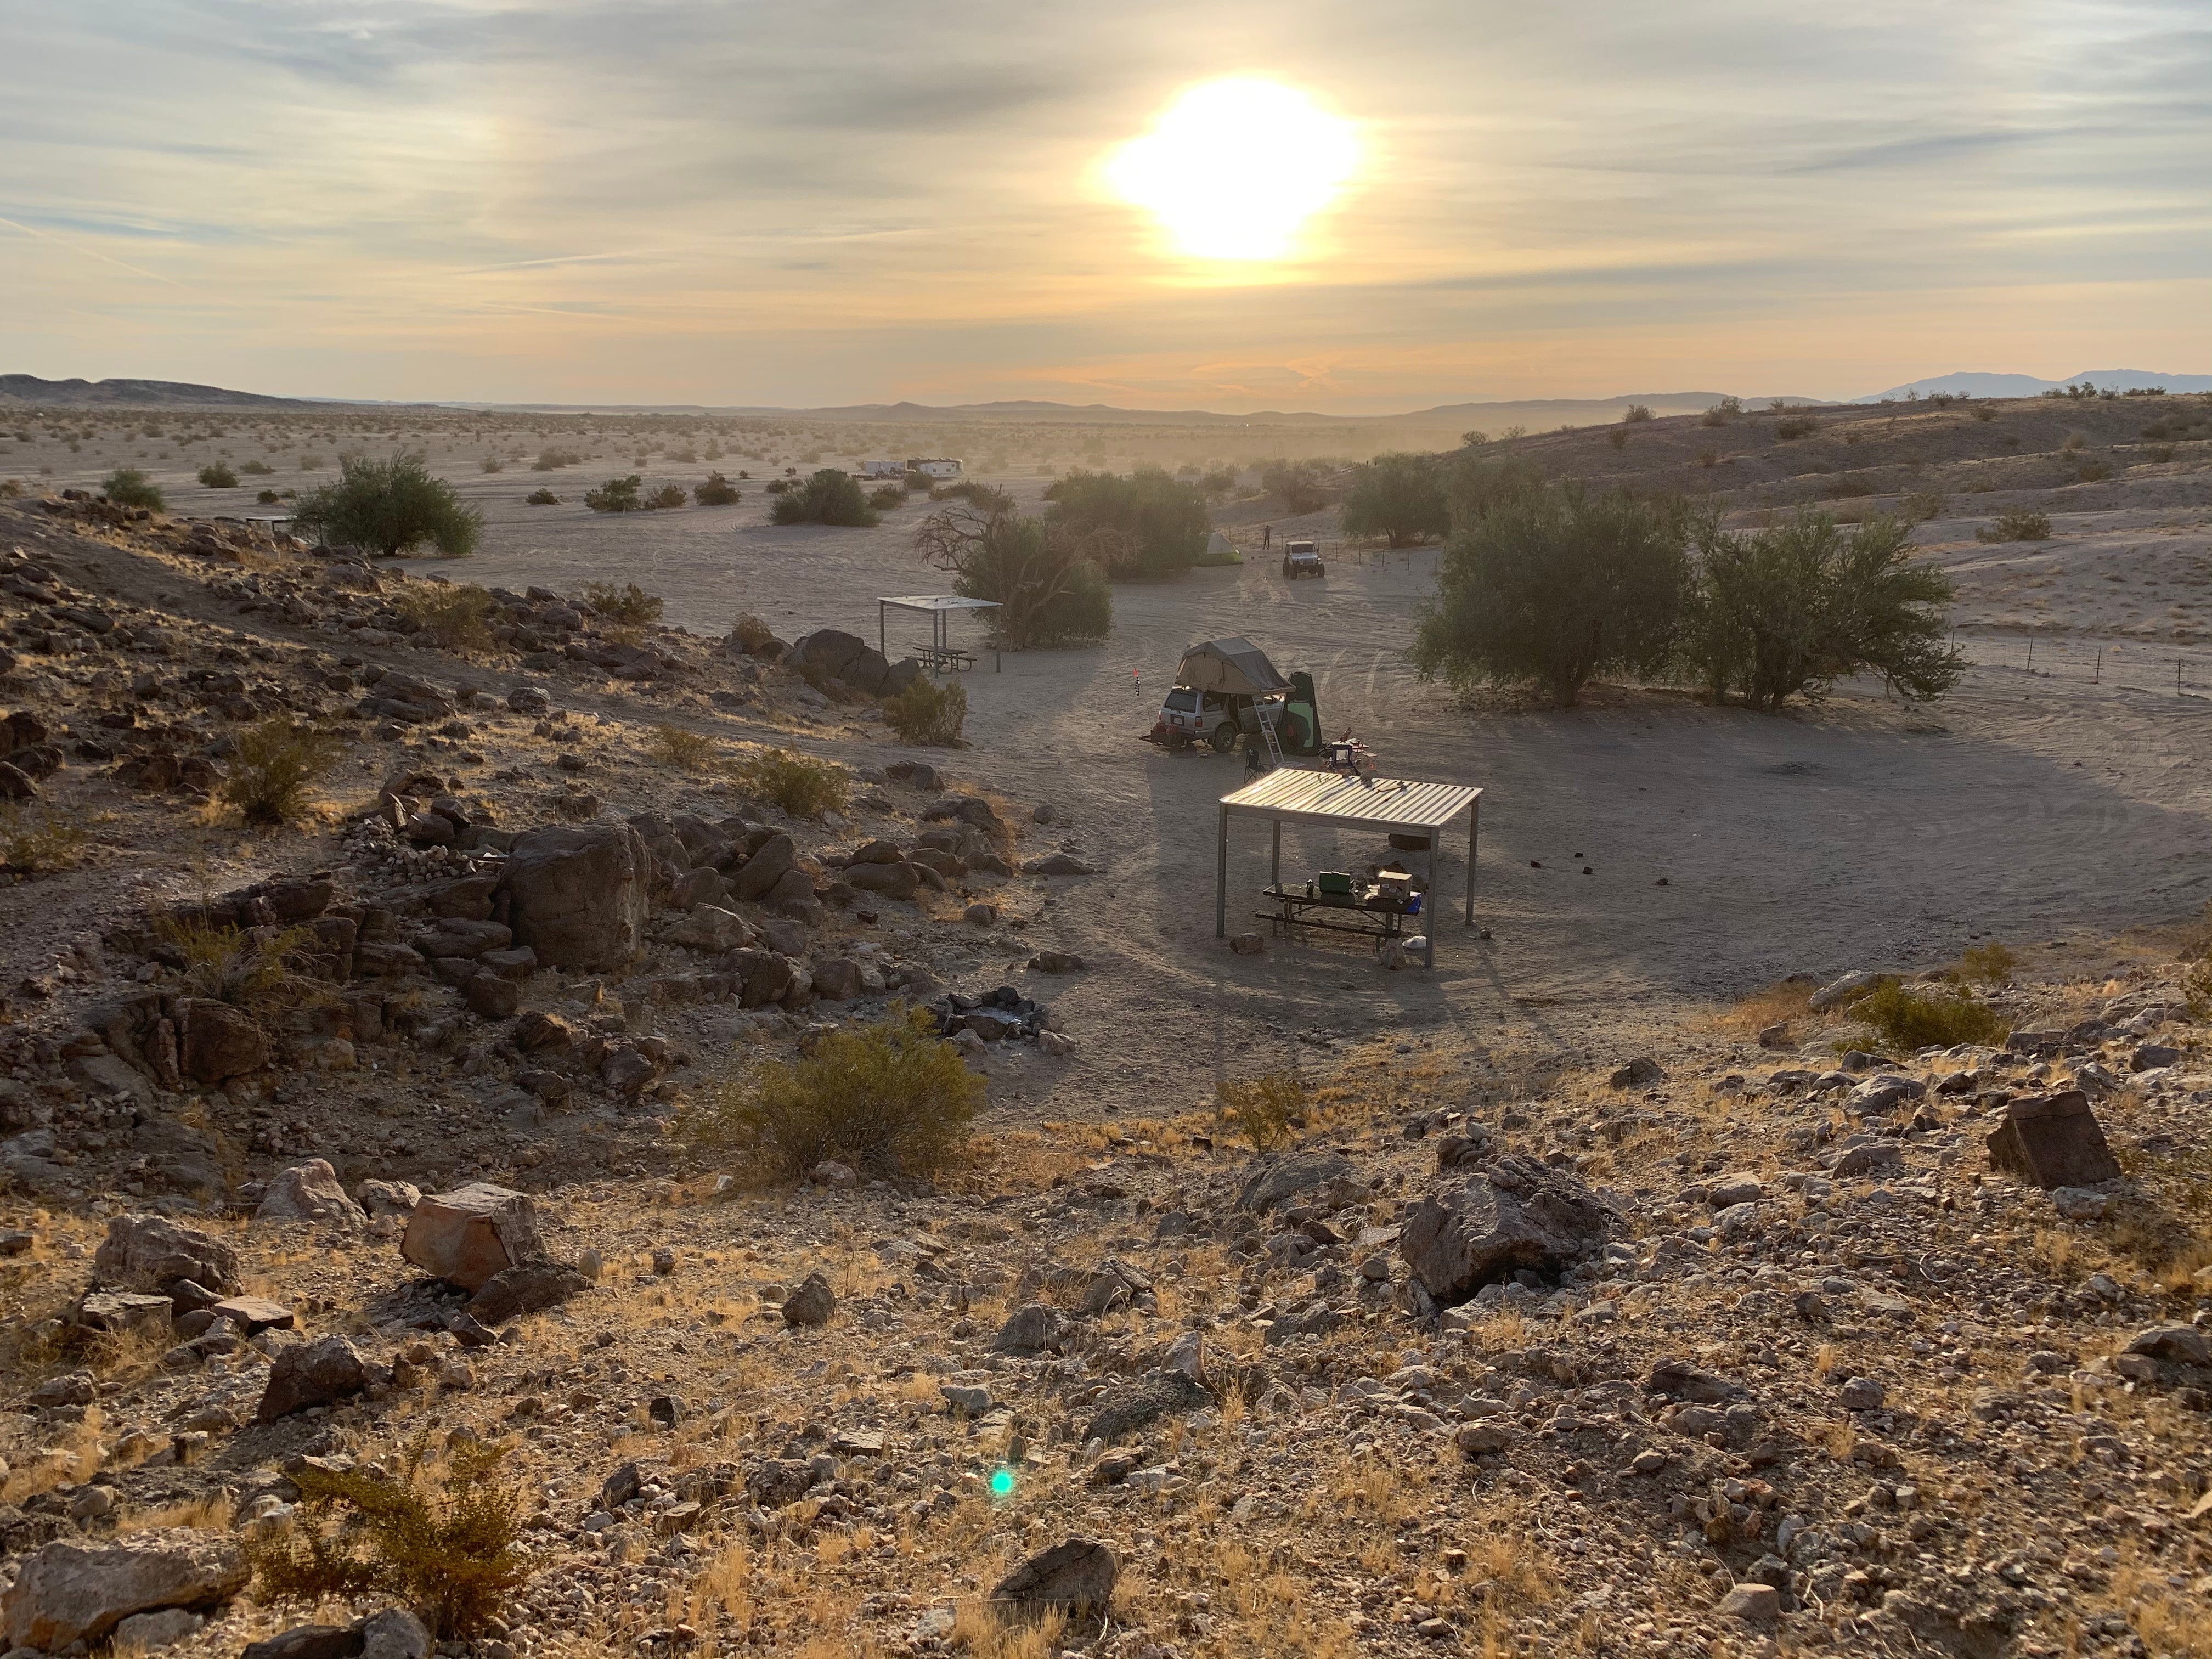 Camper submitted image from Ocotillo Wells State Vehicular Recreation Area - 1